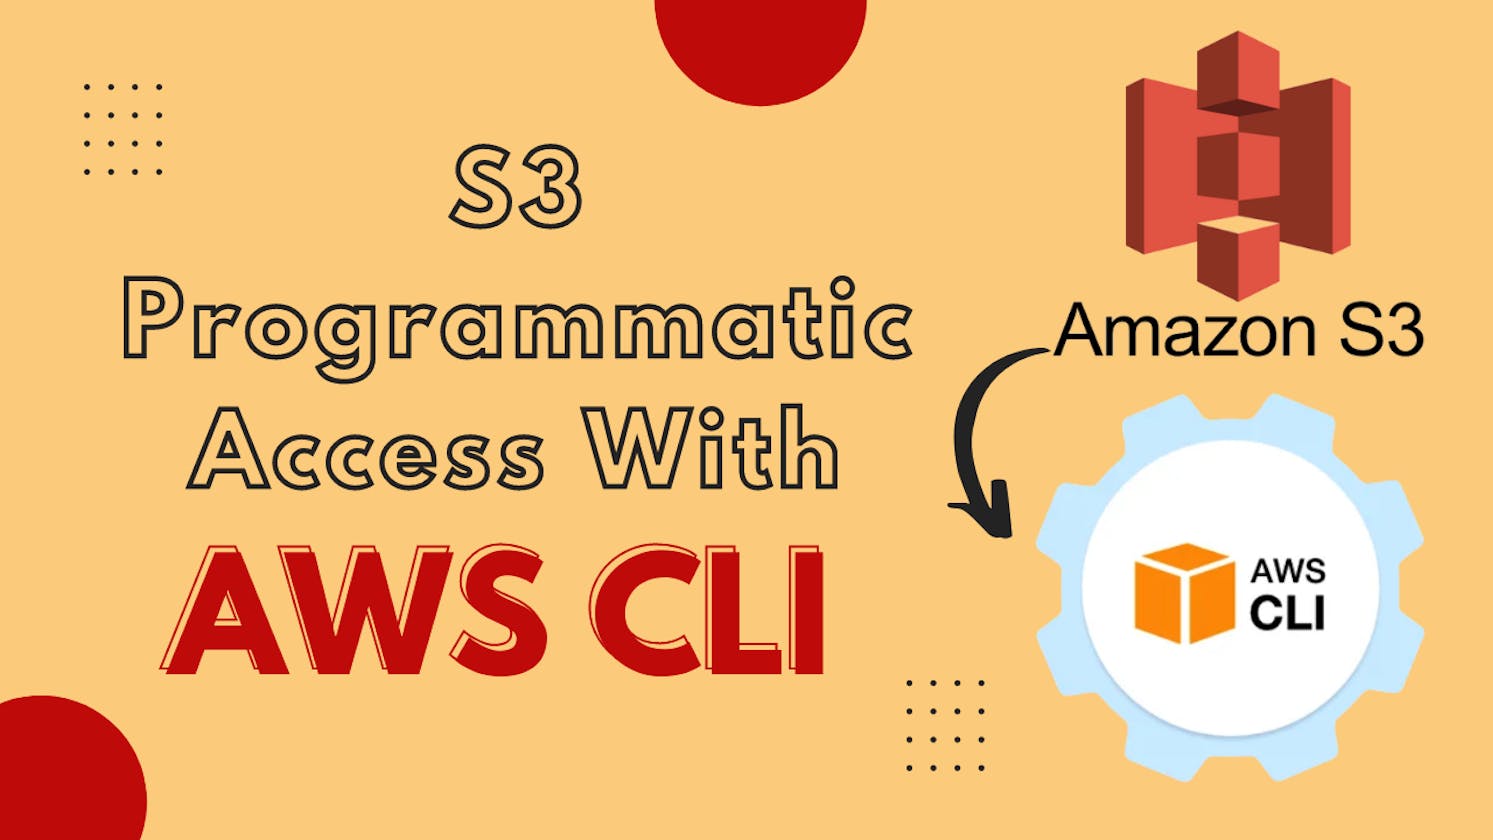 Day 43 - S3 Programmatic Access with AWS-CLI 💻 📁